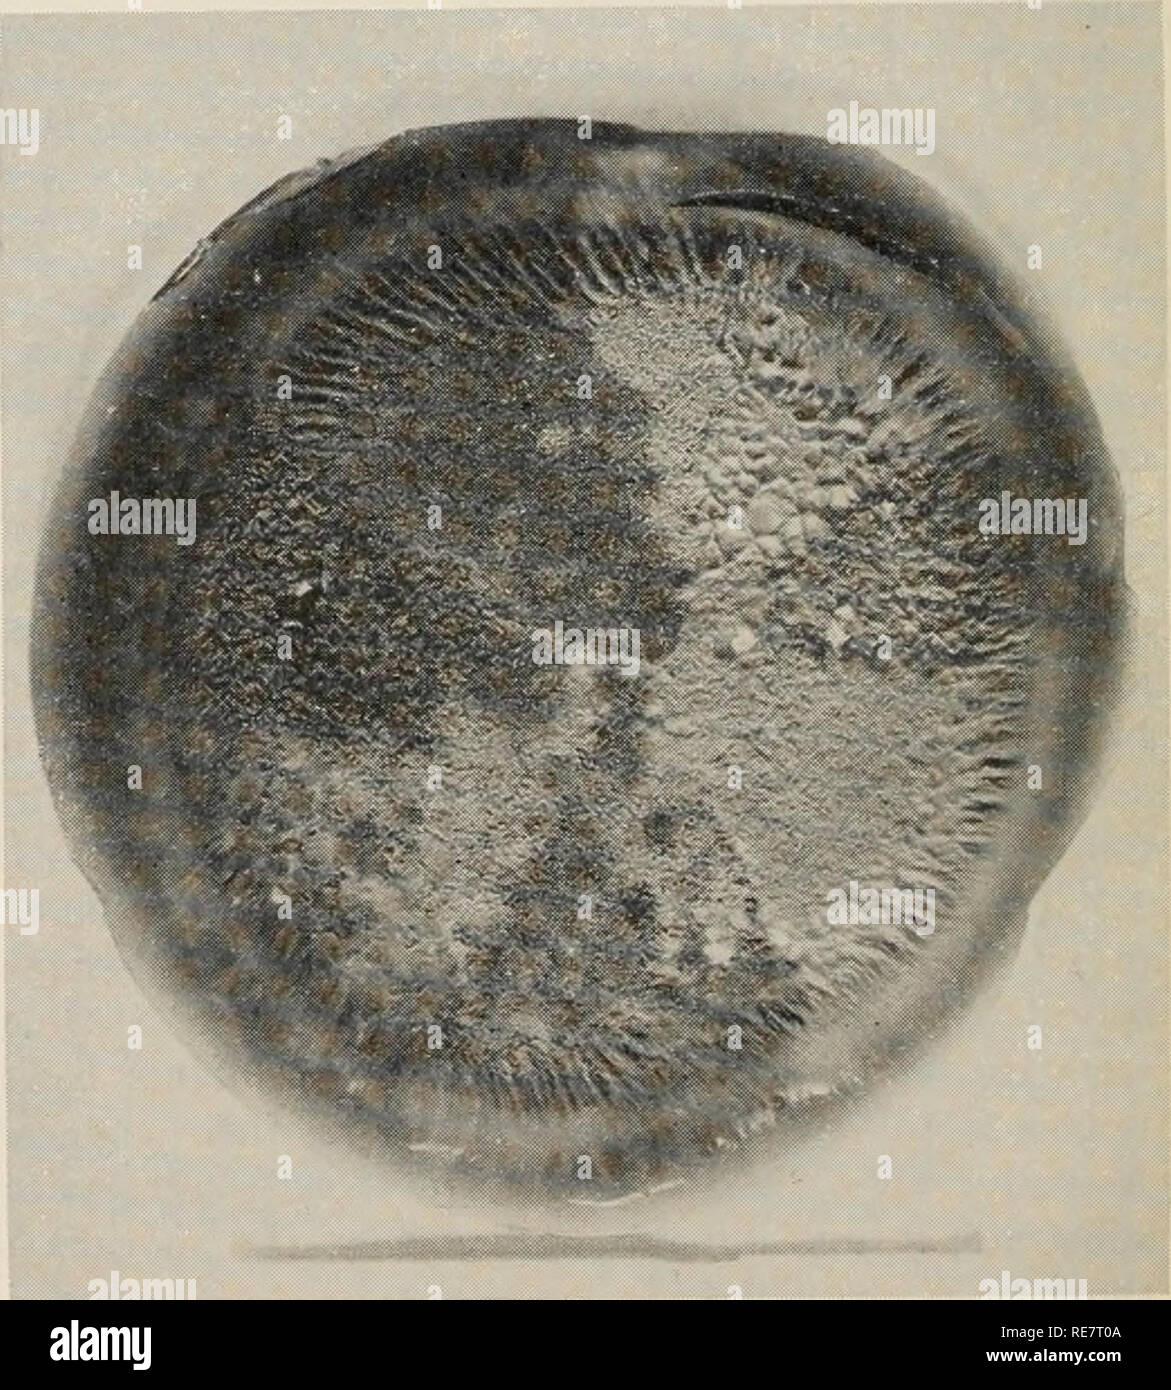 . Corn smut caused by Ustilago maydis. Corn; Smut diseases. Fig. 12. A surface-dispersed plate of a black mono- sporidial line of Ustilago maydis grown in a shake culture in potato-dextrose agar. The black line has given rise to several kinds of white mutants (Lu, 203). in factors for compatibility, virulence, and physiology without obvious modification of cultural characters. Naturally, genetic changes for certain morphological characters such as size and echinulation of chlamydo- spores and changes in parasitism cannot be ascer- tained without inoculating the host. Frequency of mutation.—Alt Stock Photo